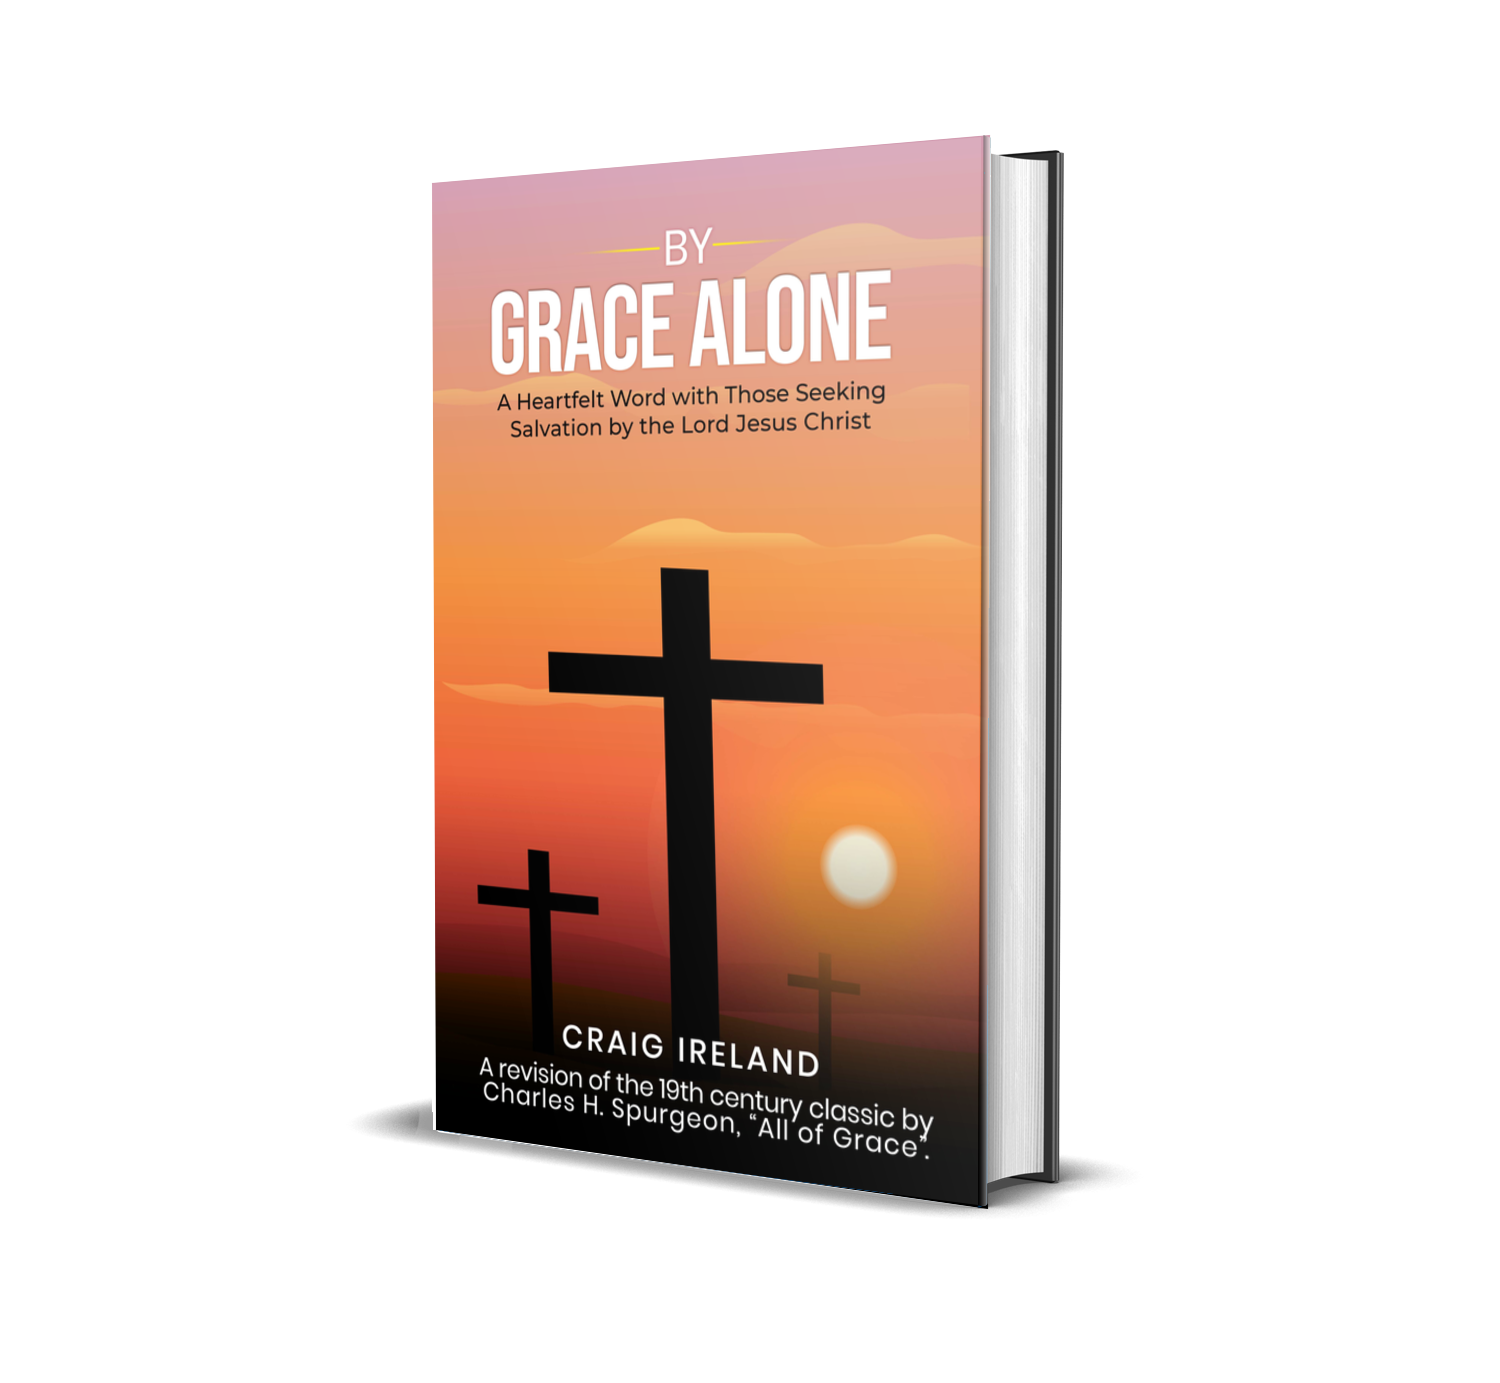 By Grace Alone: A Heartfelt Word with Those Seeking Salvation by Craig Ireland